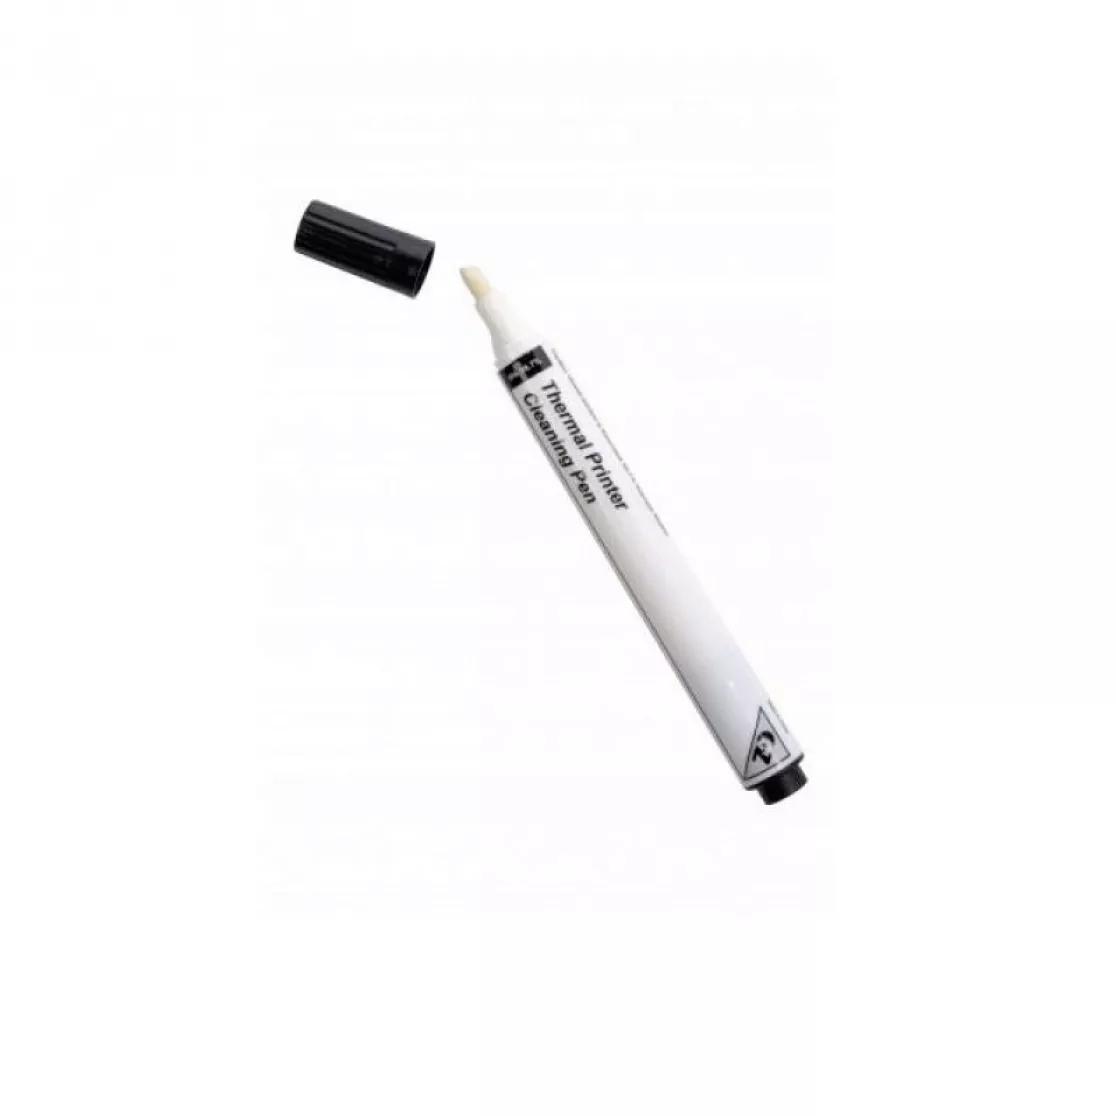 Cleaning Pen for Dascom card printers